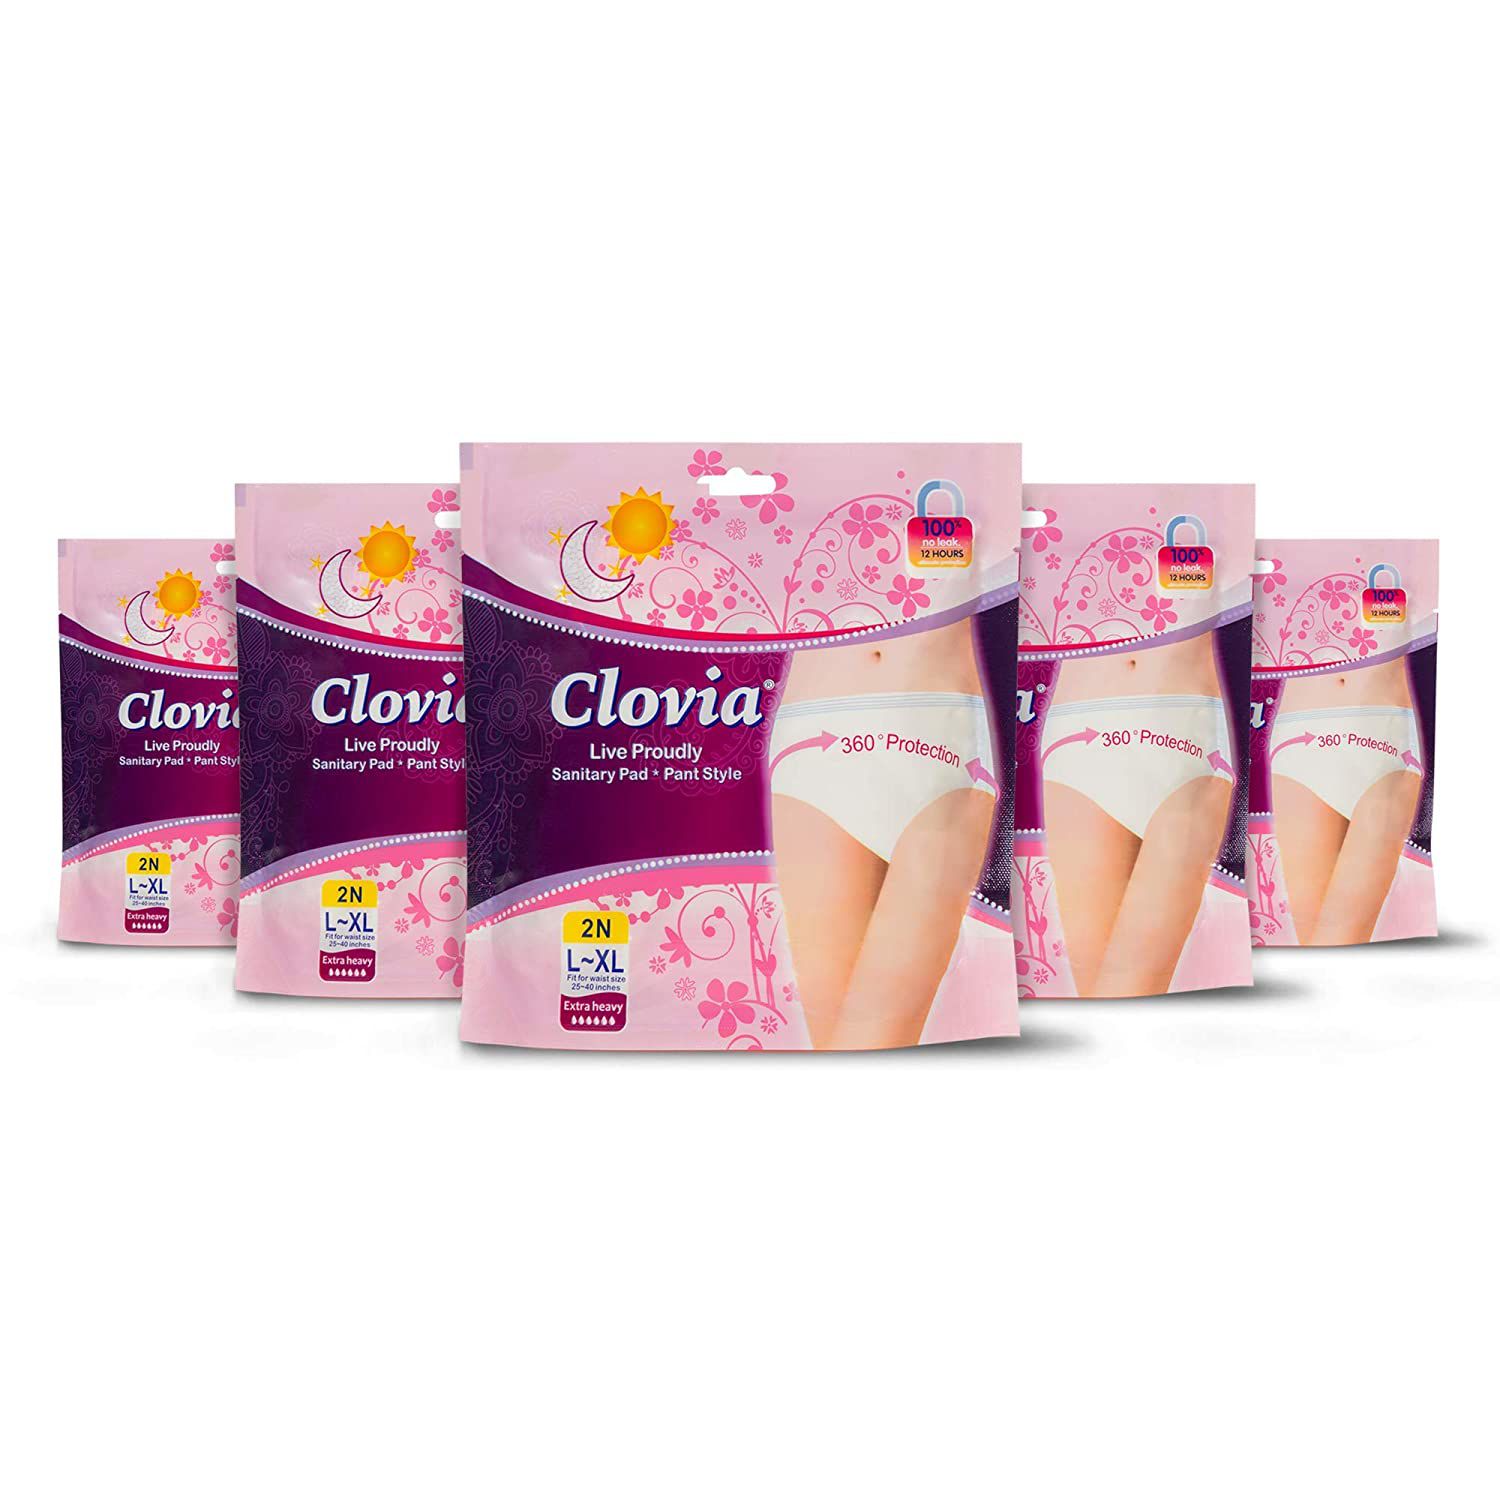 Clovia Heavy Flow Disposable Period Panties for Sanitary Protection L - XL (5 Pack - 10 Panties) Sanitary Pads Pant Style